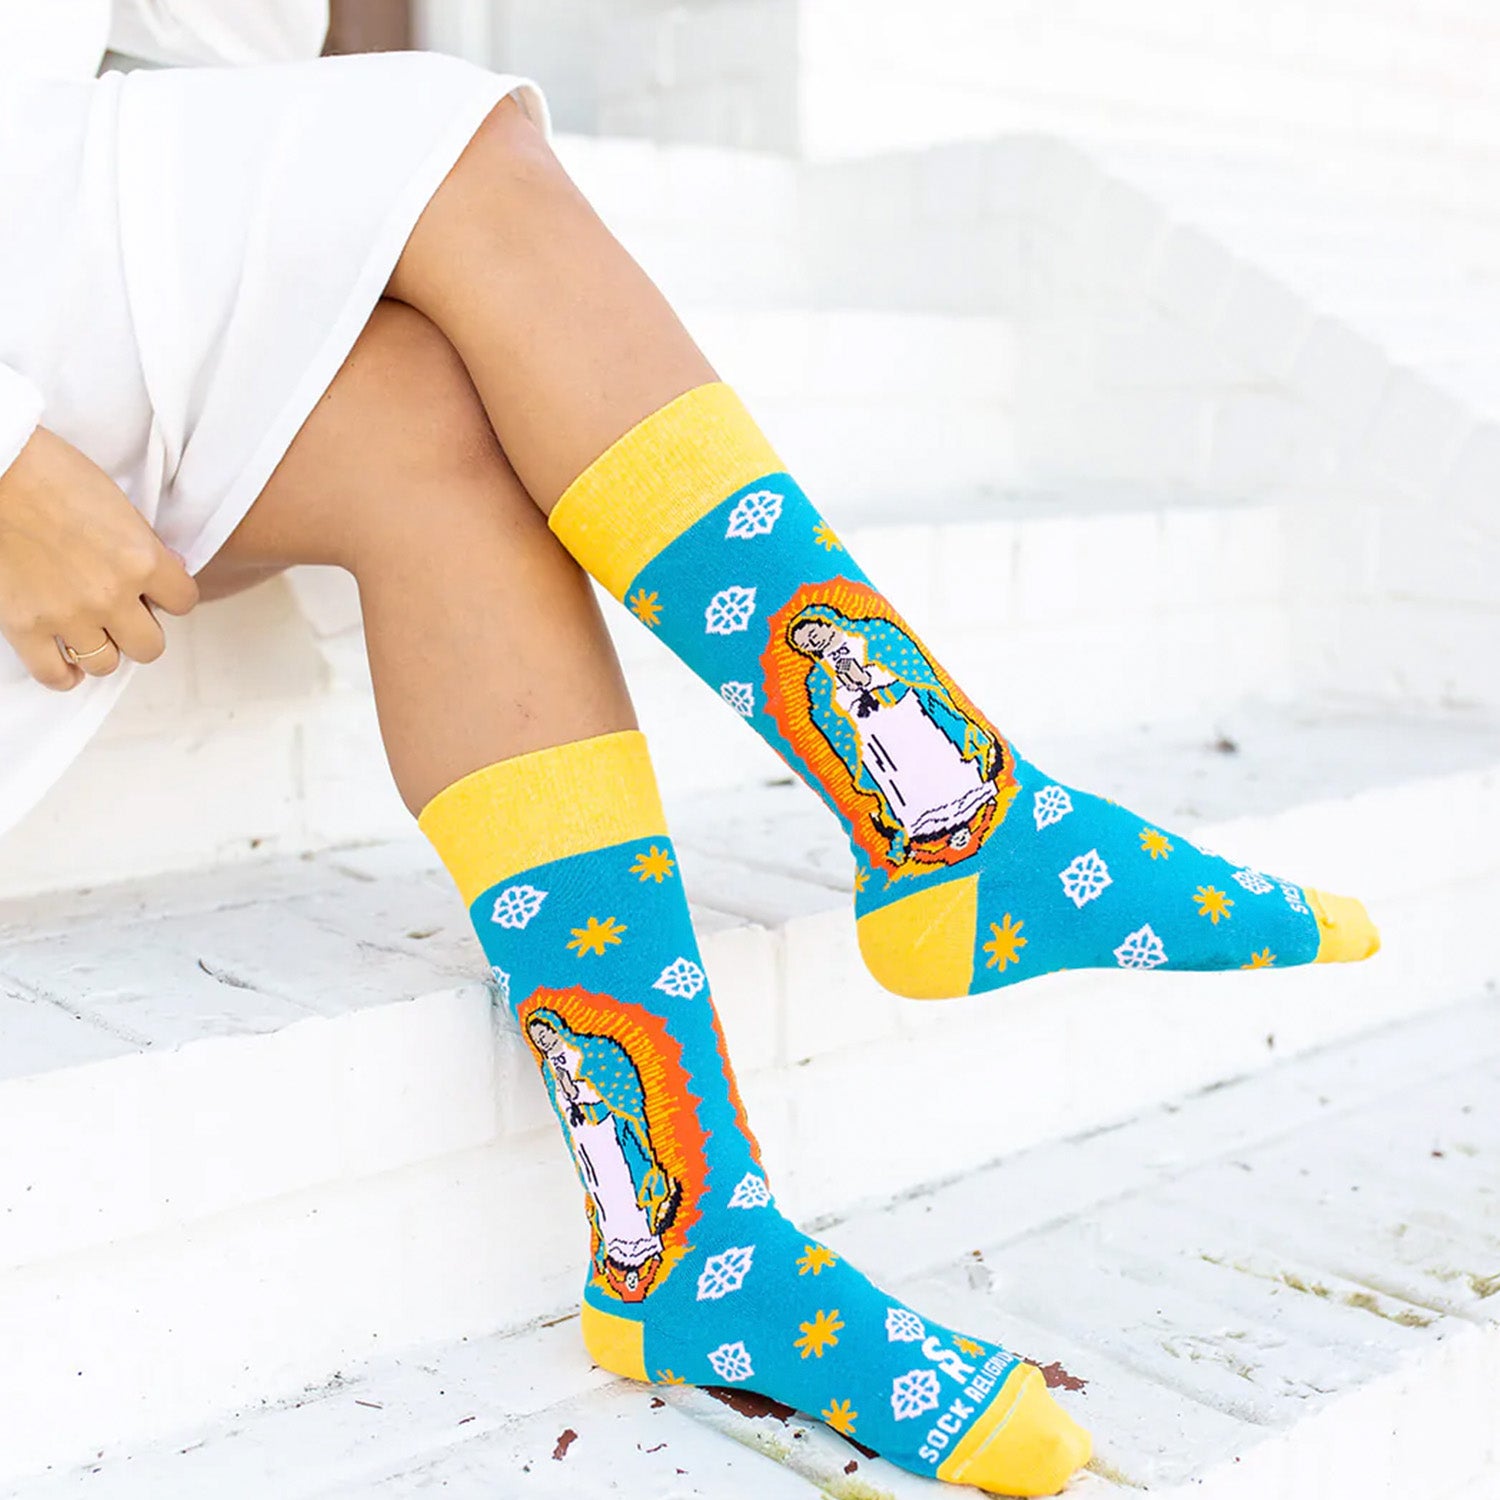 Our Lady of Guadalupe Socks